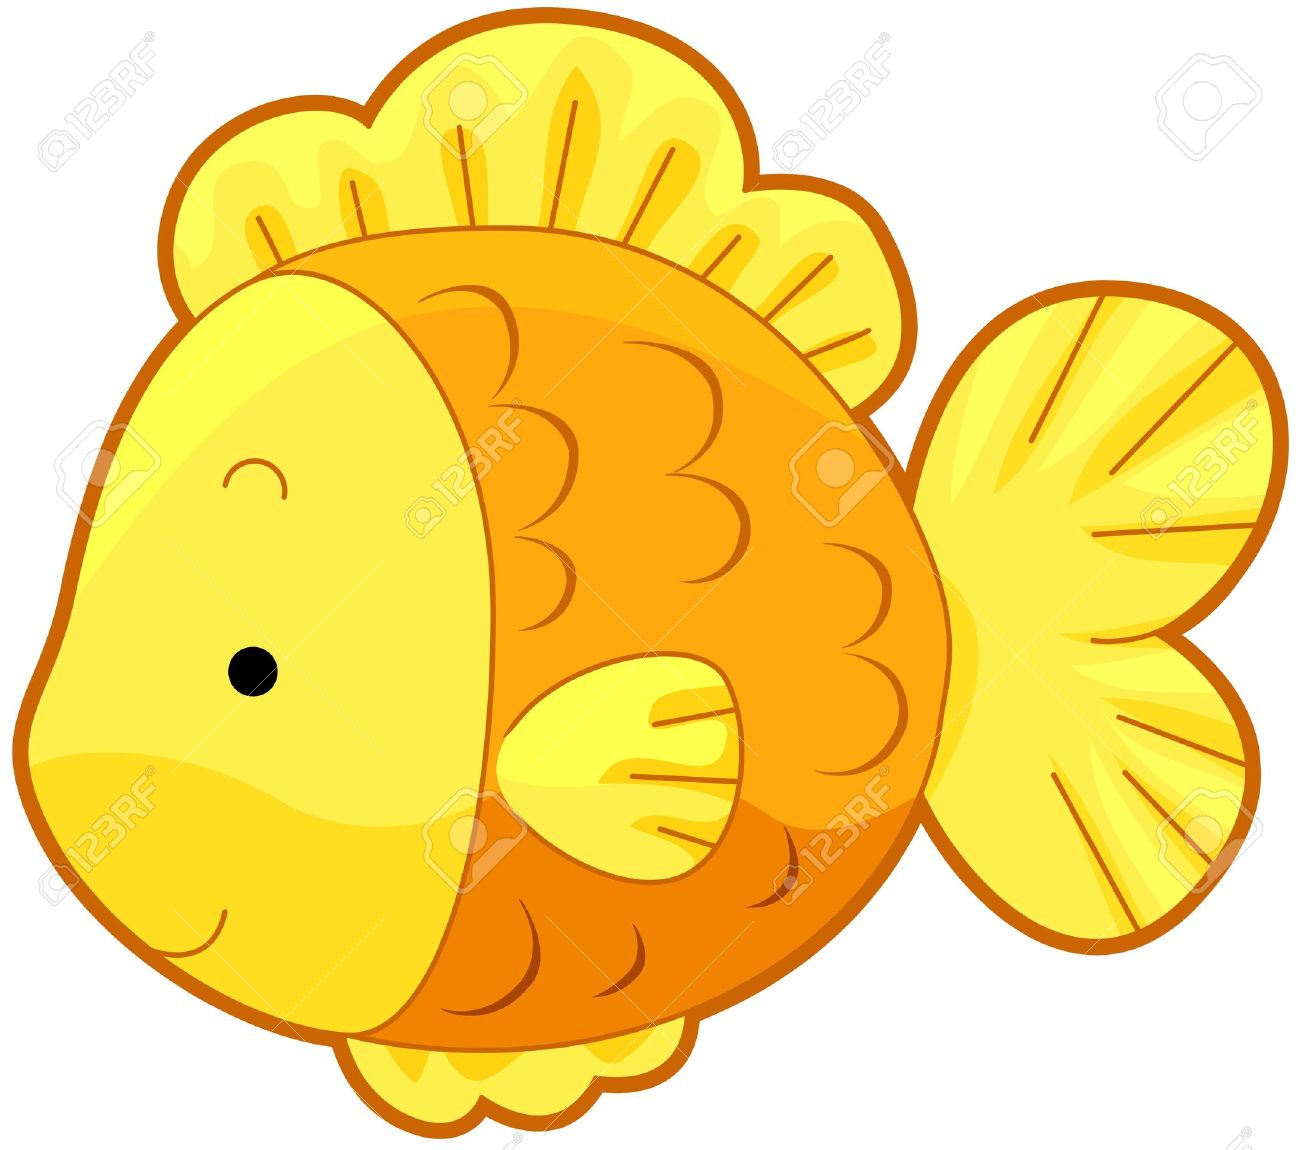 Free Goldfish Clipart yellow, Download Free Clip Art on